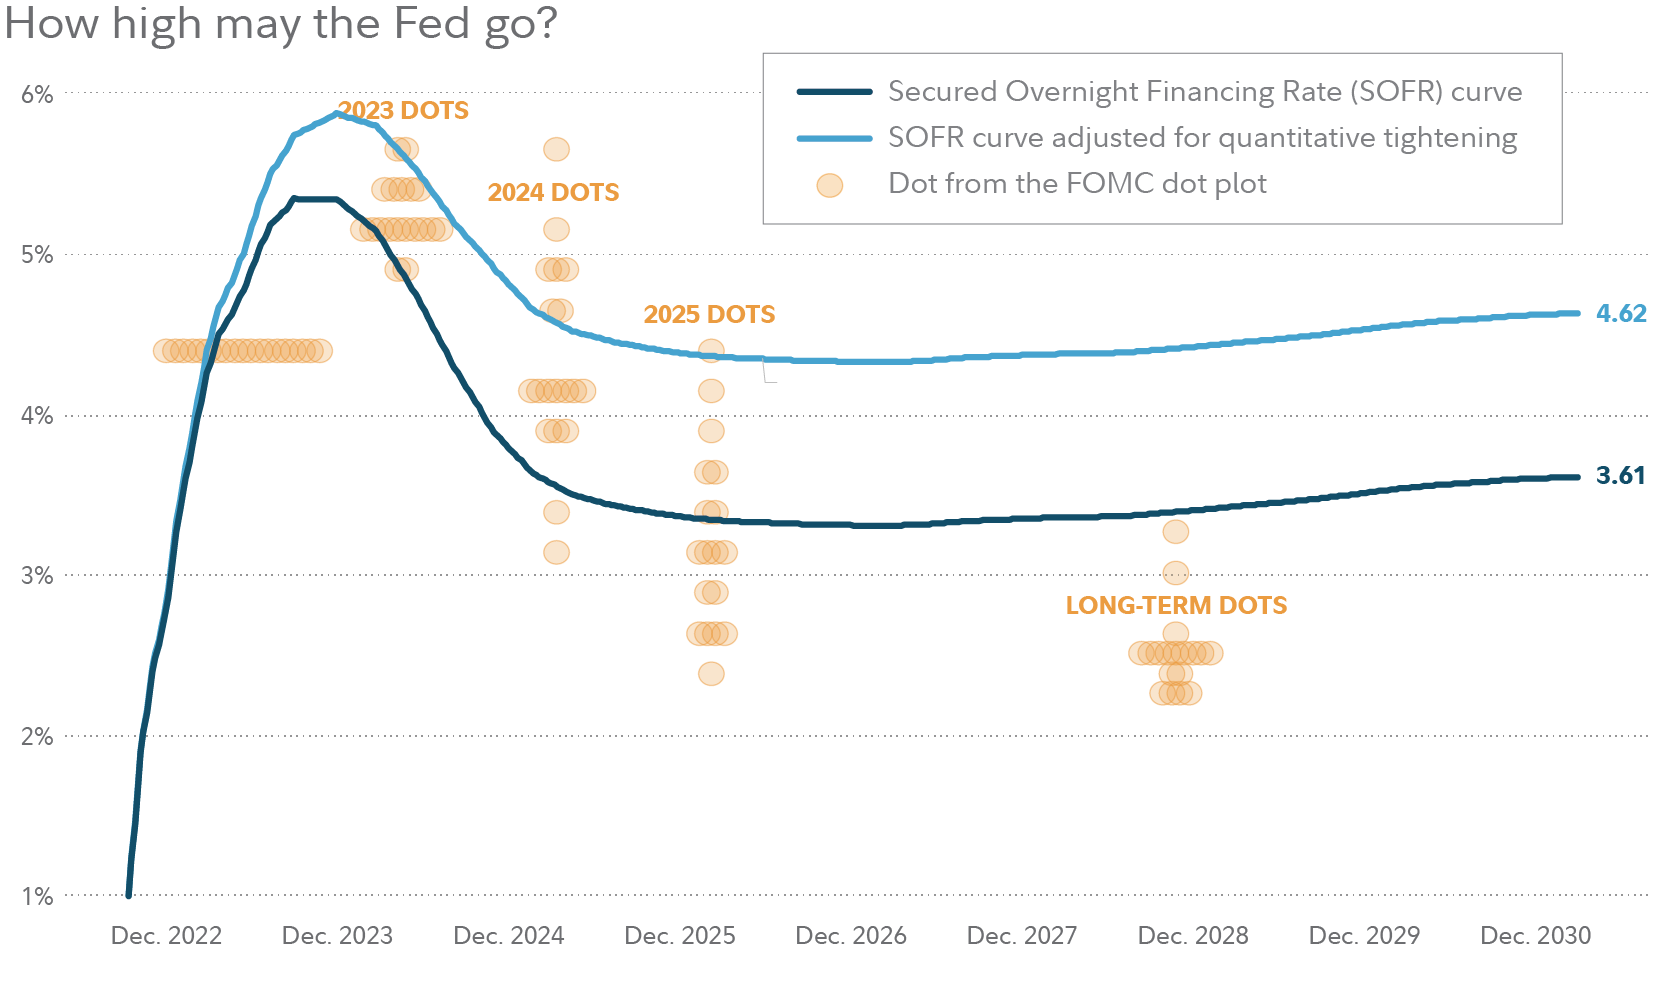 Chart shows implied estimates for future interest rates embedded into current yield curves. When considering the estimated effects of quantitative tightening, the Secured Overnight Financing Rate Curve is expected to reach a high of almost 6%.